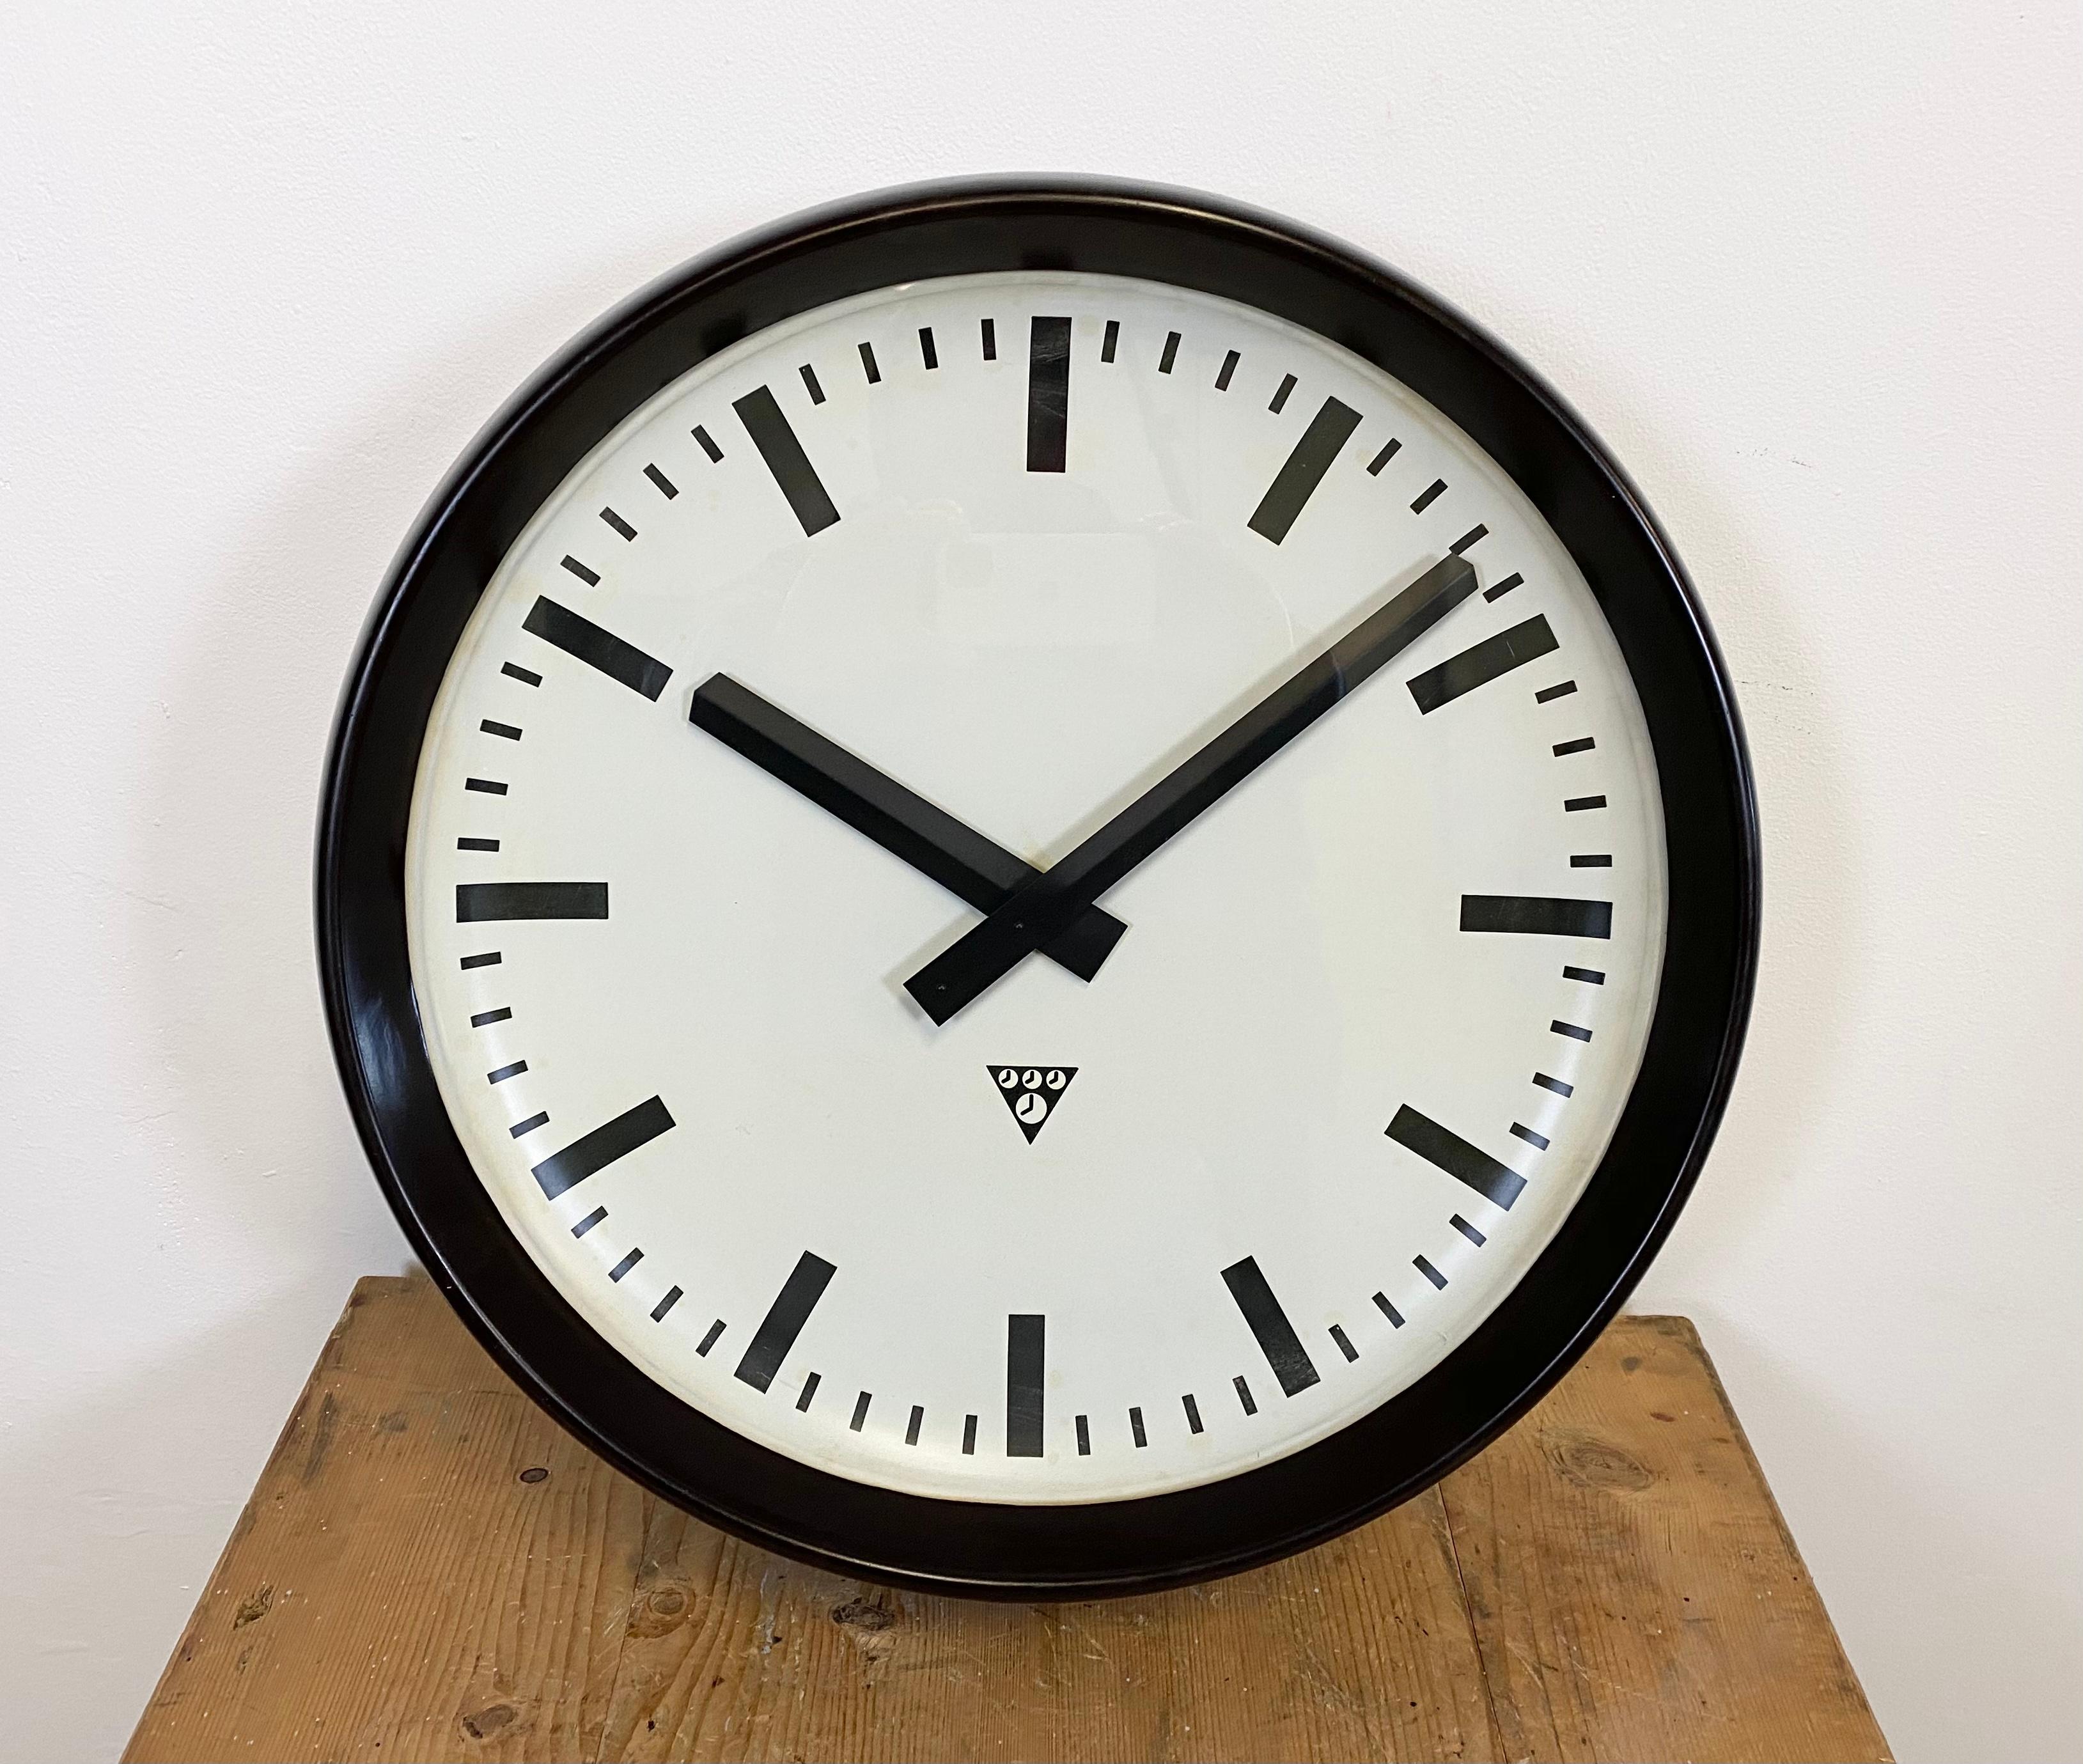 This large wall clock was produced by Pragotron in former Czechoslovakia during the 1960s. It features a brown Bakelite frame, an aluminum dial, an aluminum hands and a clear glass cover. The piece has been converted into a battery-powered clockwork